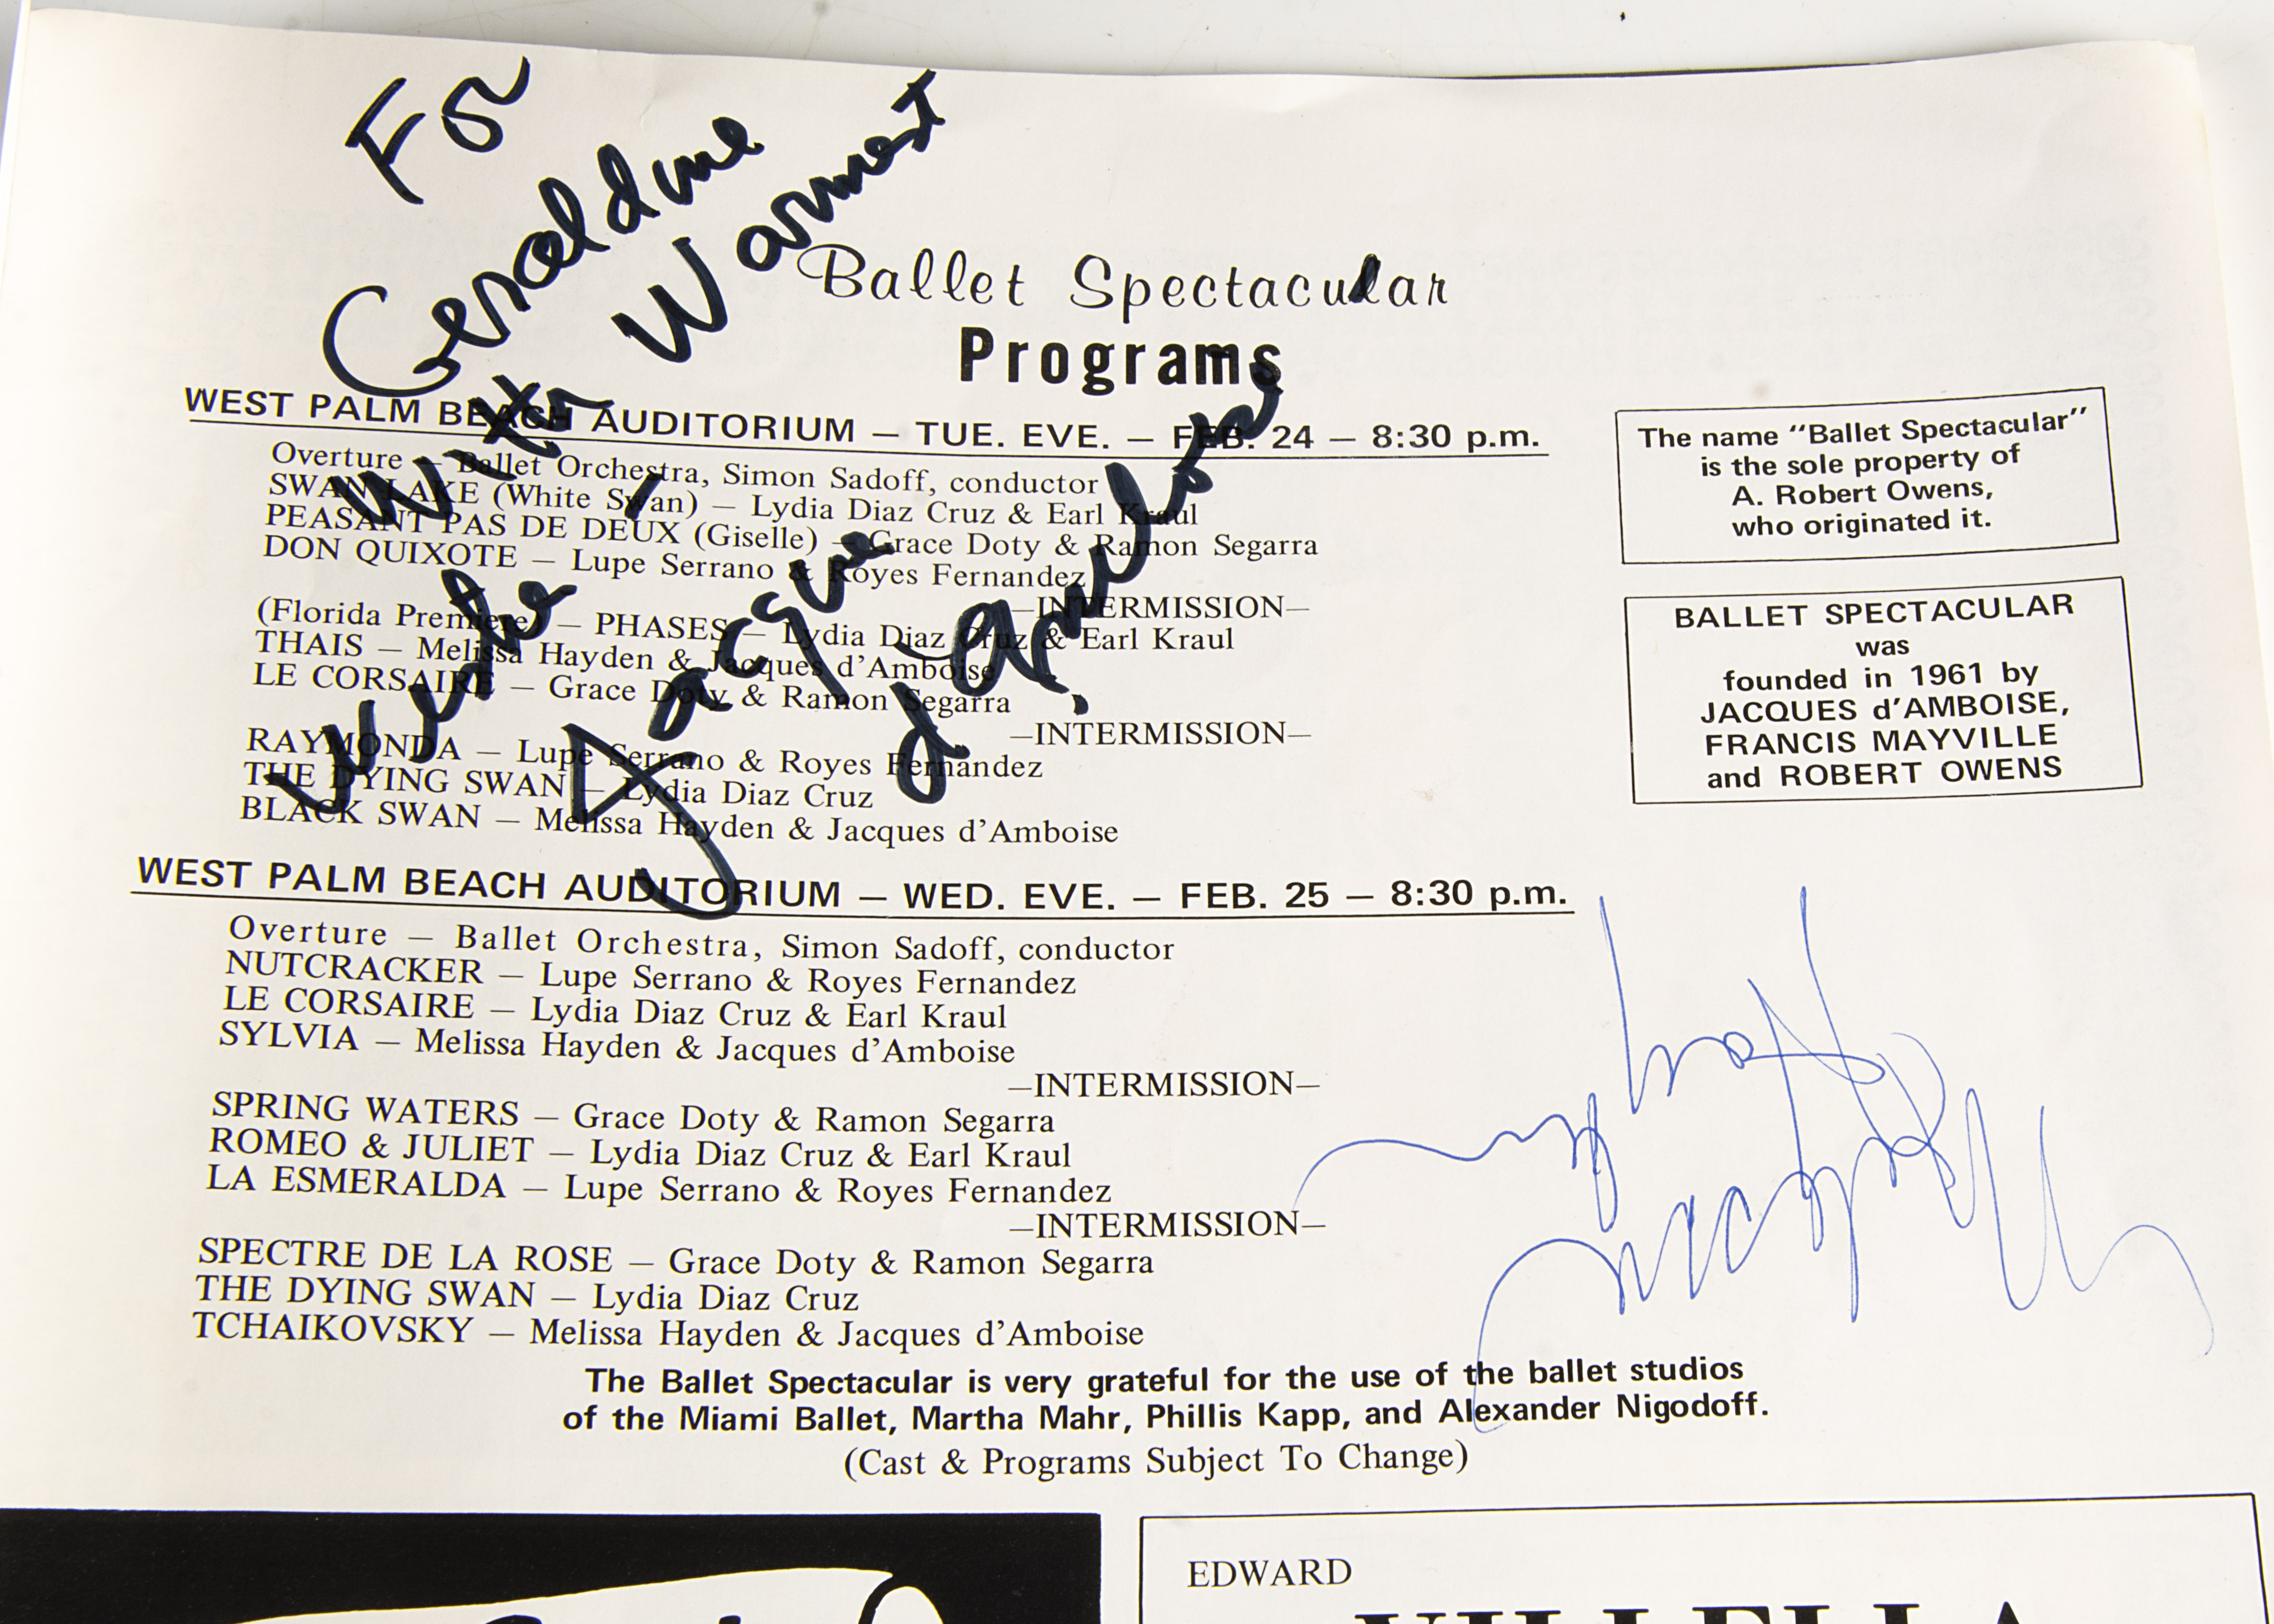 Rudolf Nureyev / Jacques D'Amboise / Bolshoi Signatures plus, a number of Ballet related - Image 5 of 5